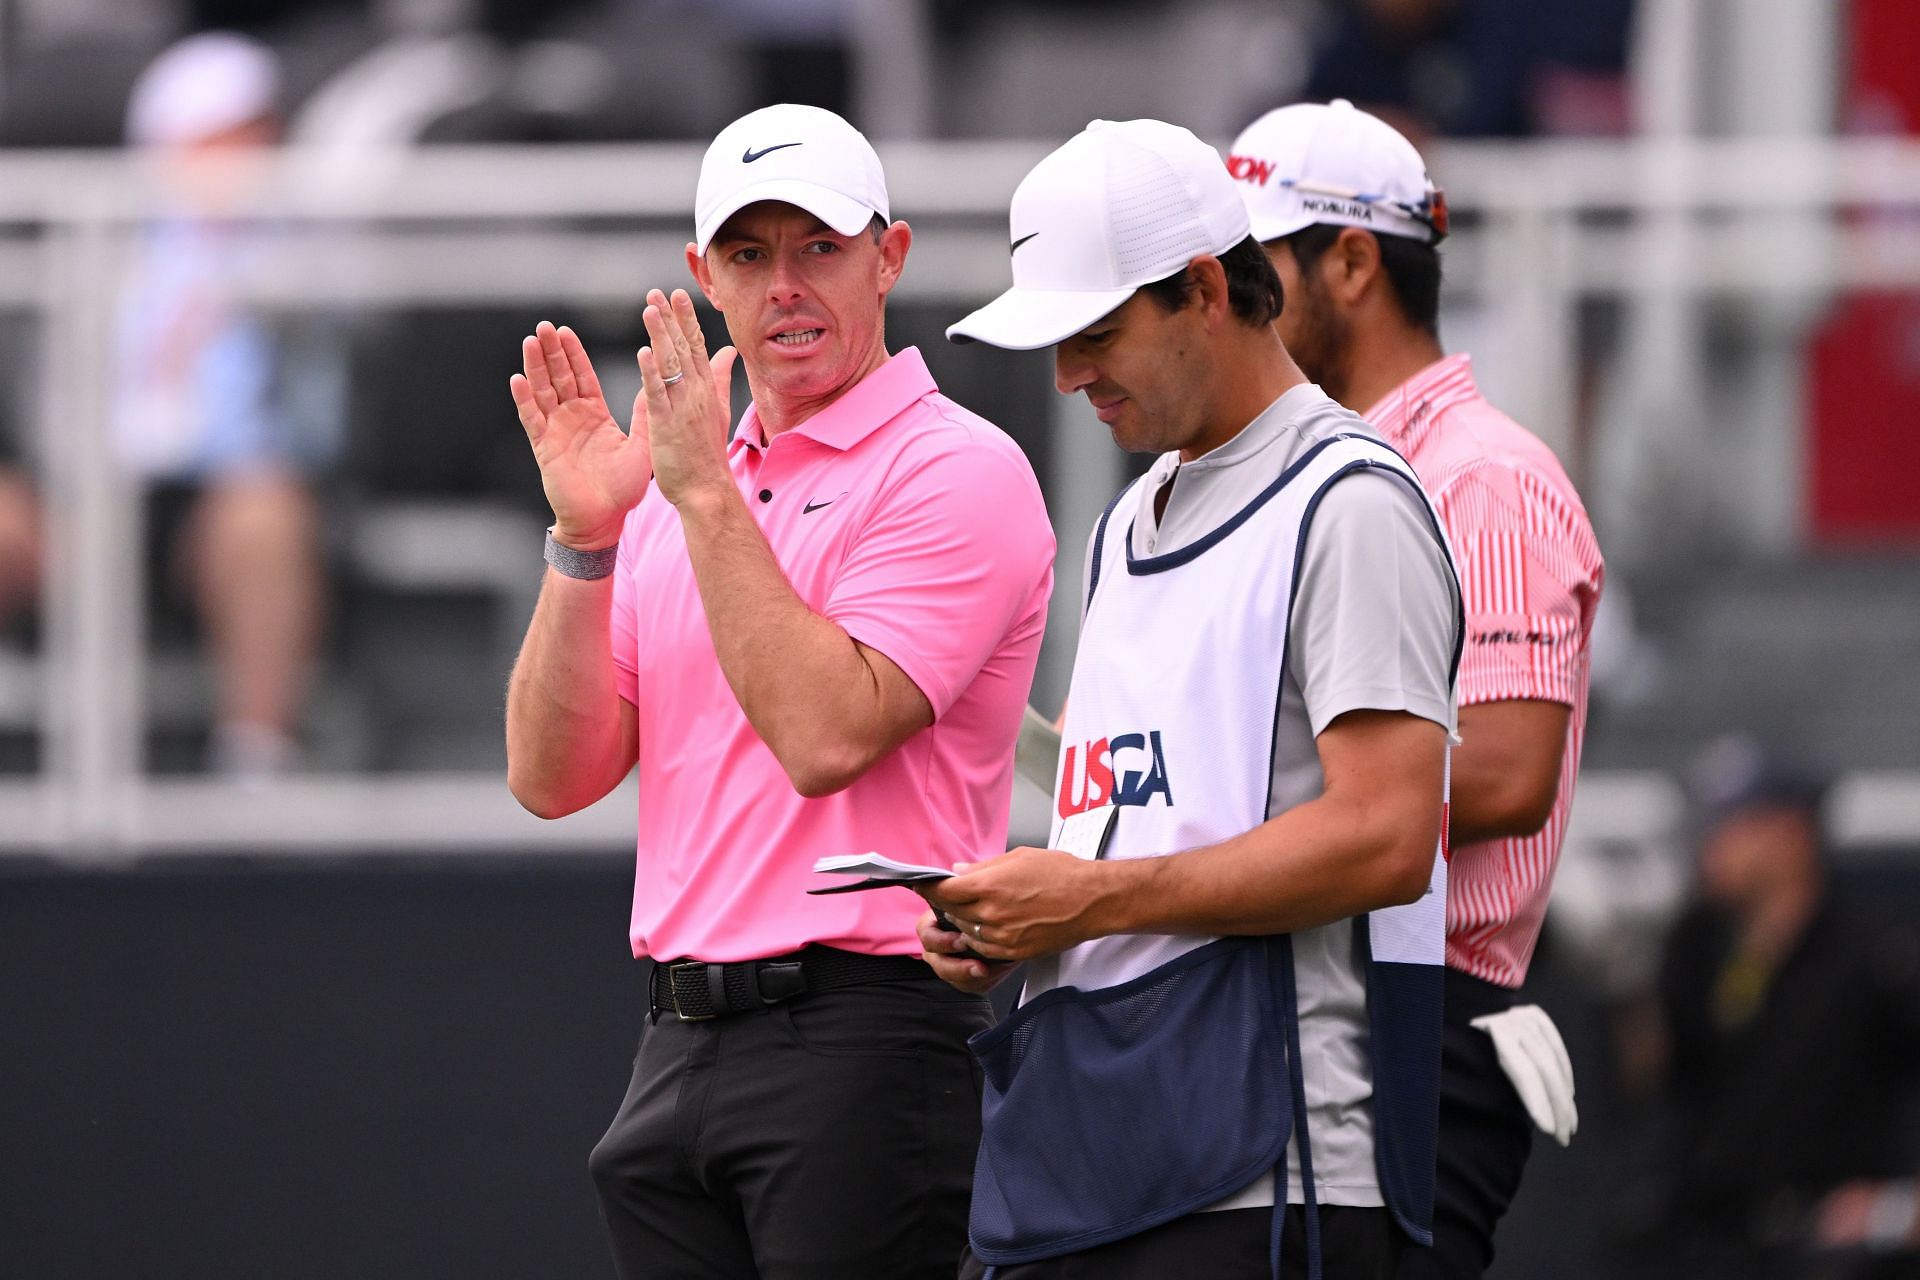 123rd U.S. Open Championship - Round Two